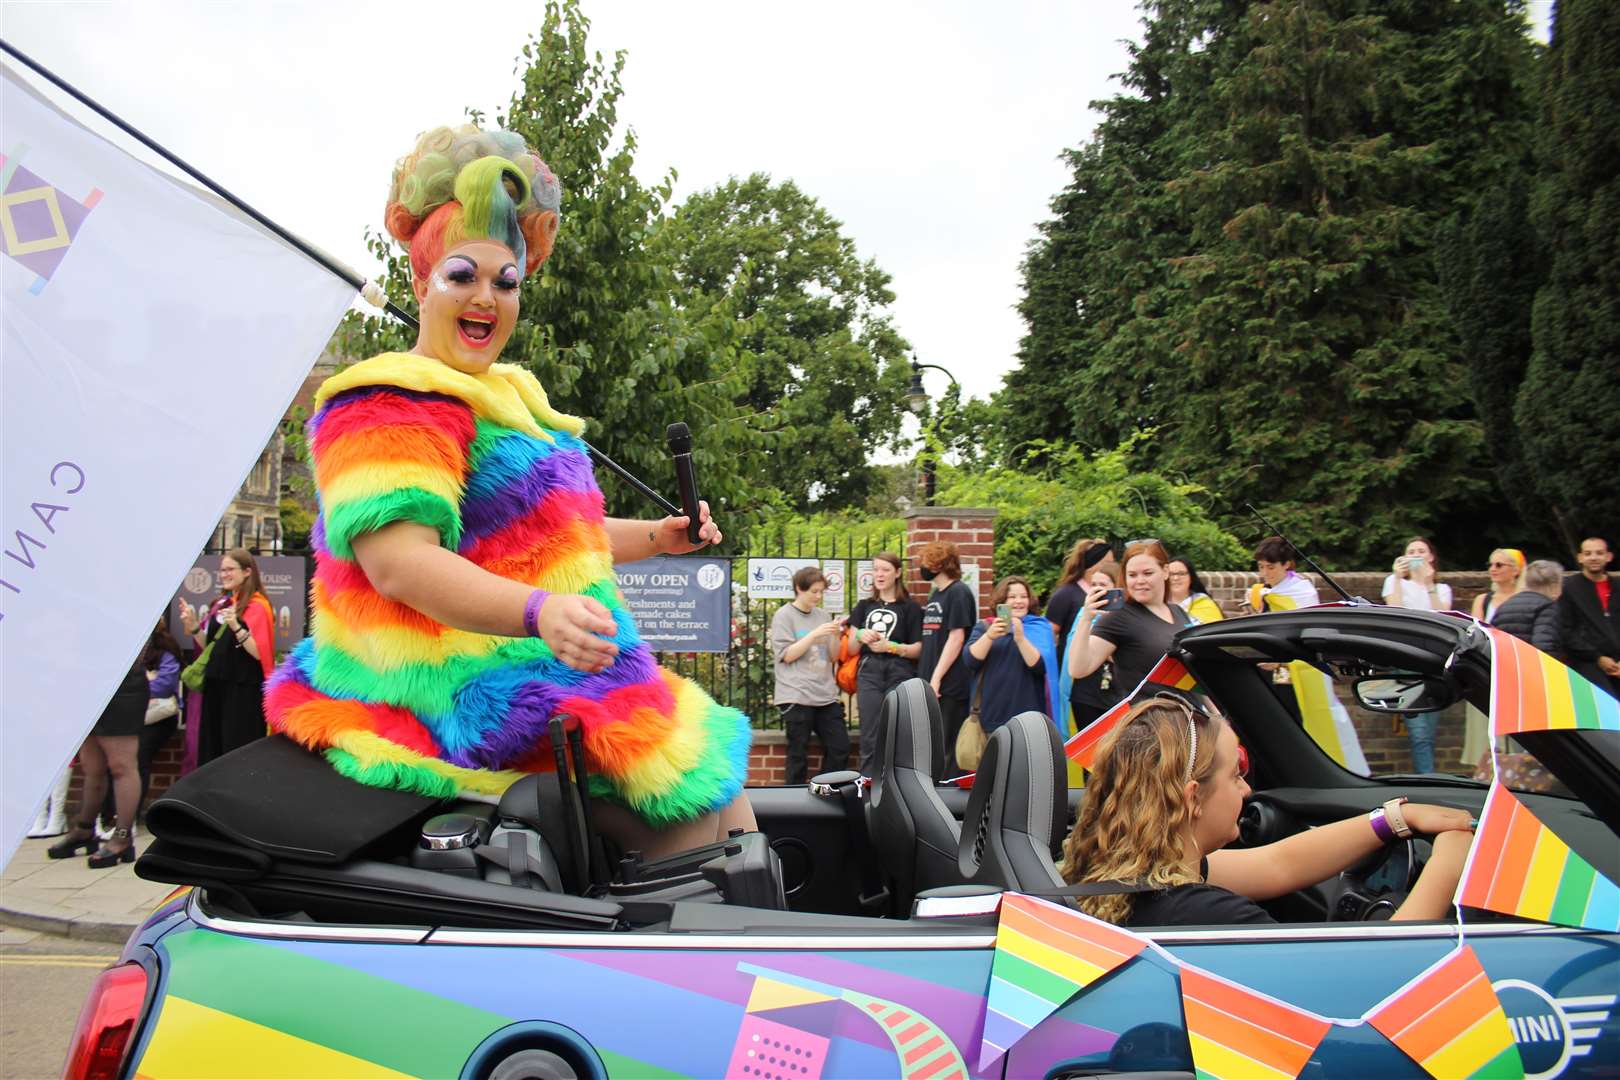 Last year's Canterbury Pride attracted thousands of visitors. Picture: Photography With Evangeline